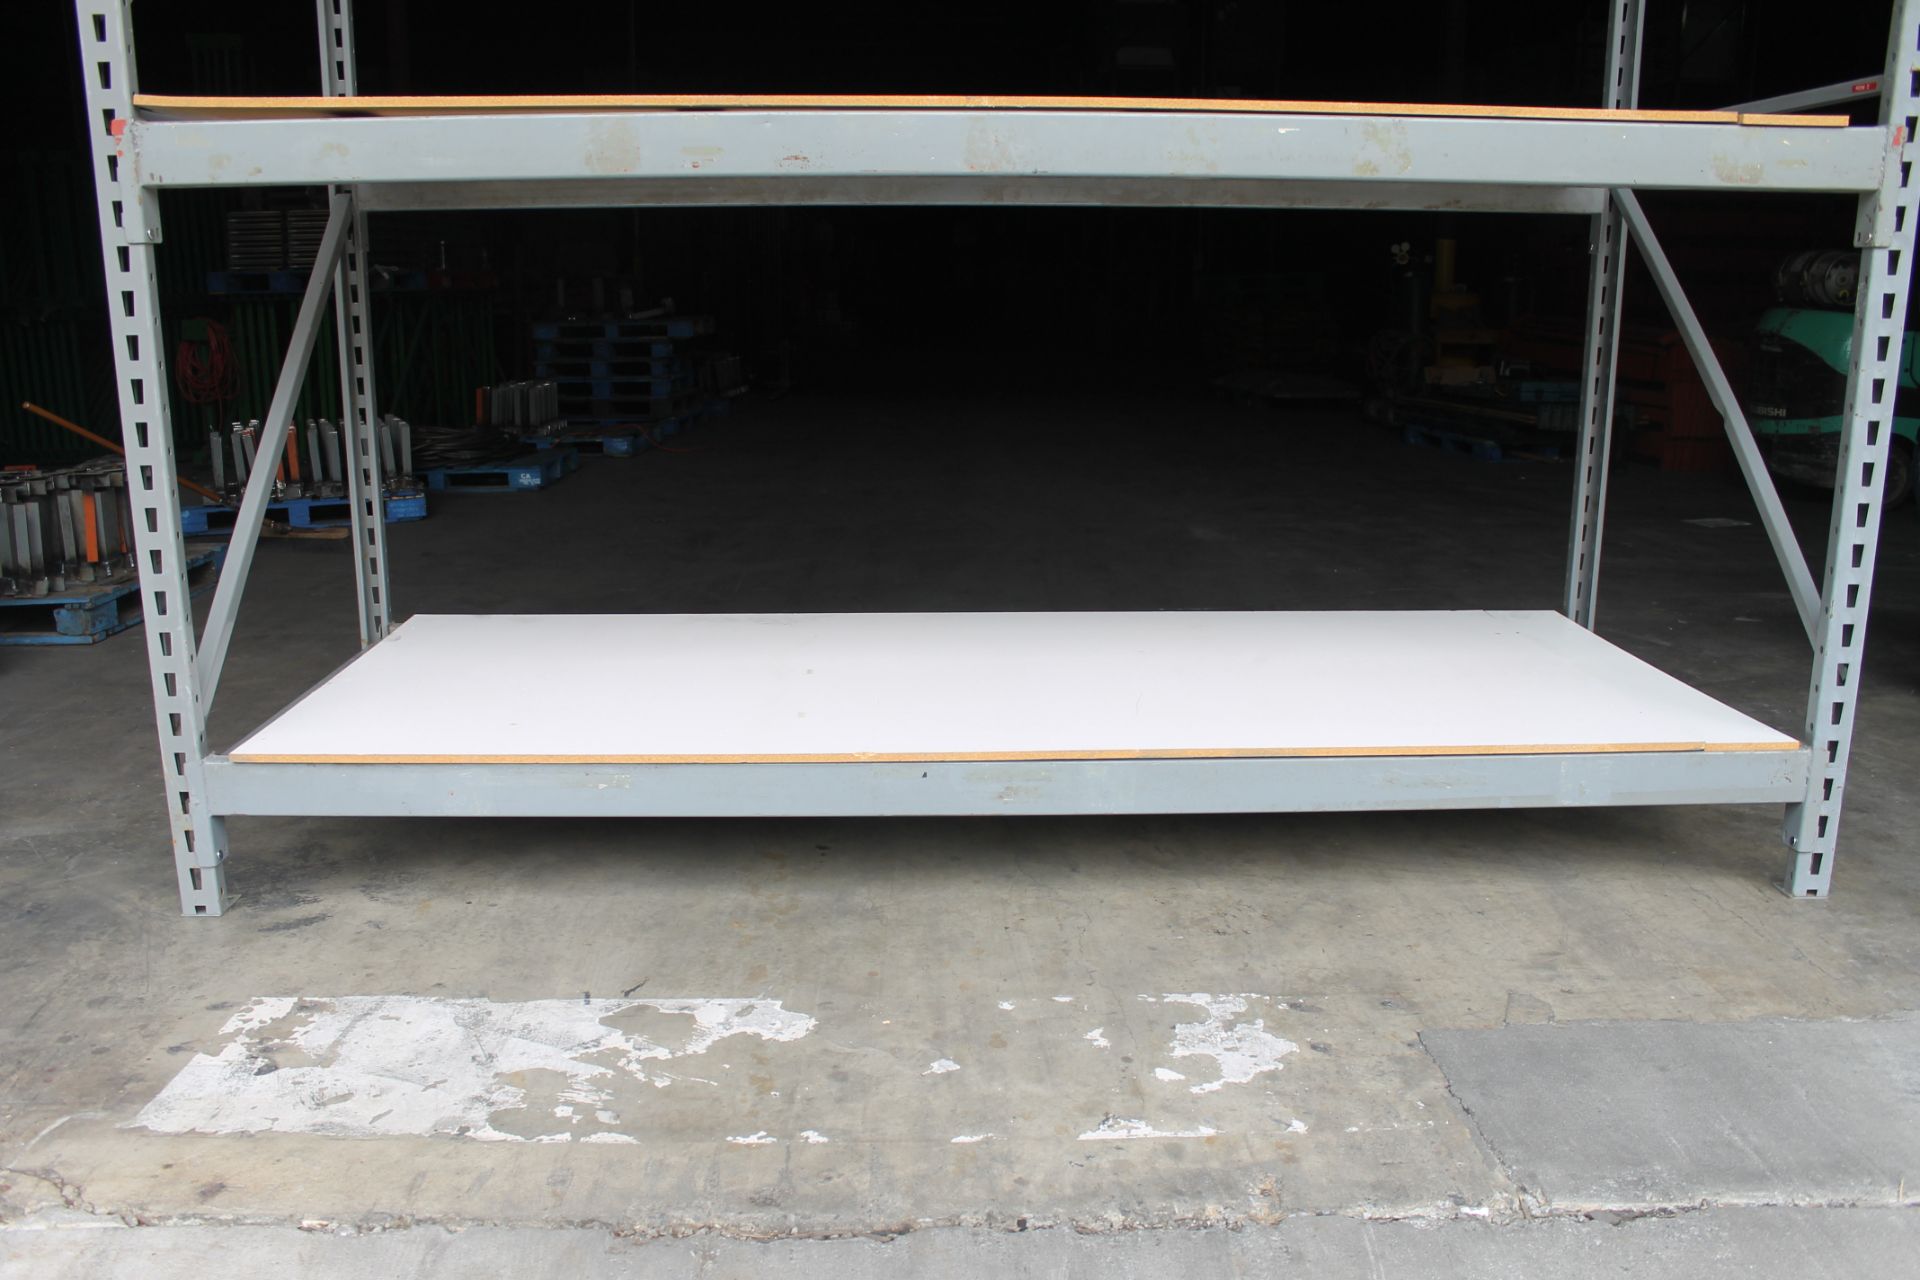 14 BAYS OF 120"H X 48"D X 117"L INDUSTRIAL SHELVING WITH LAMINATED WOOD DECKING, - Image 4 of 4